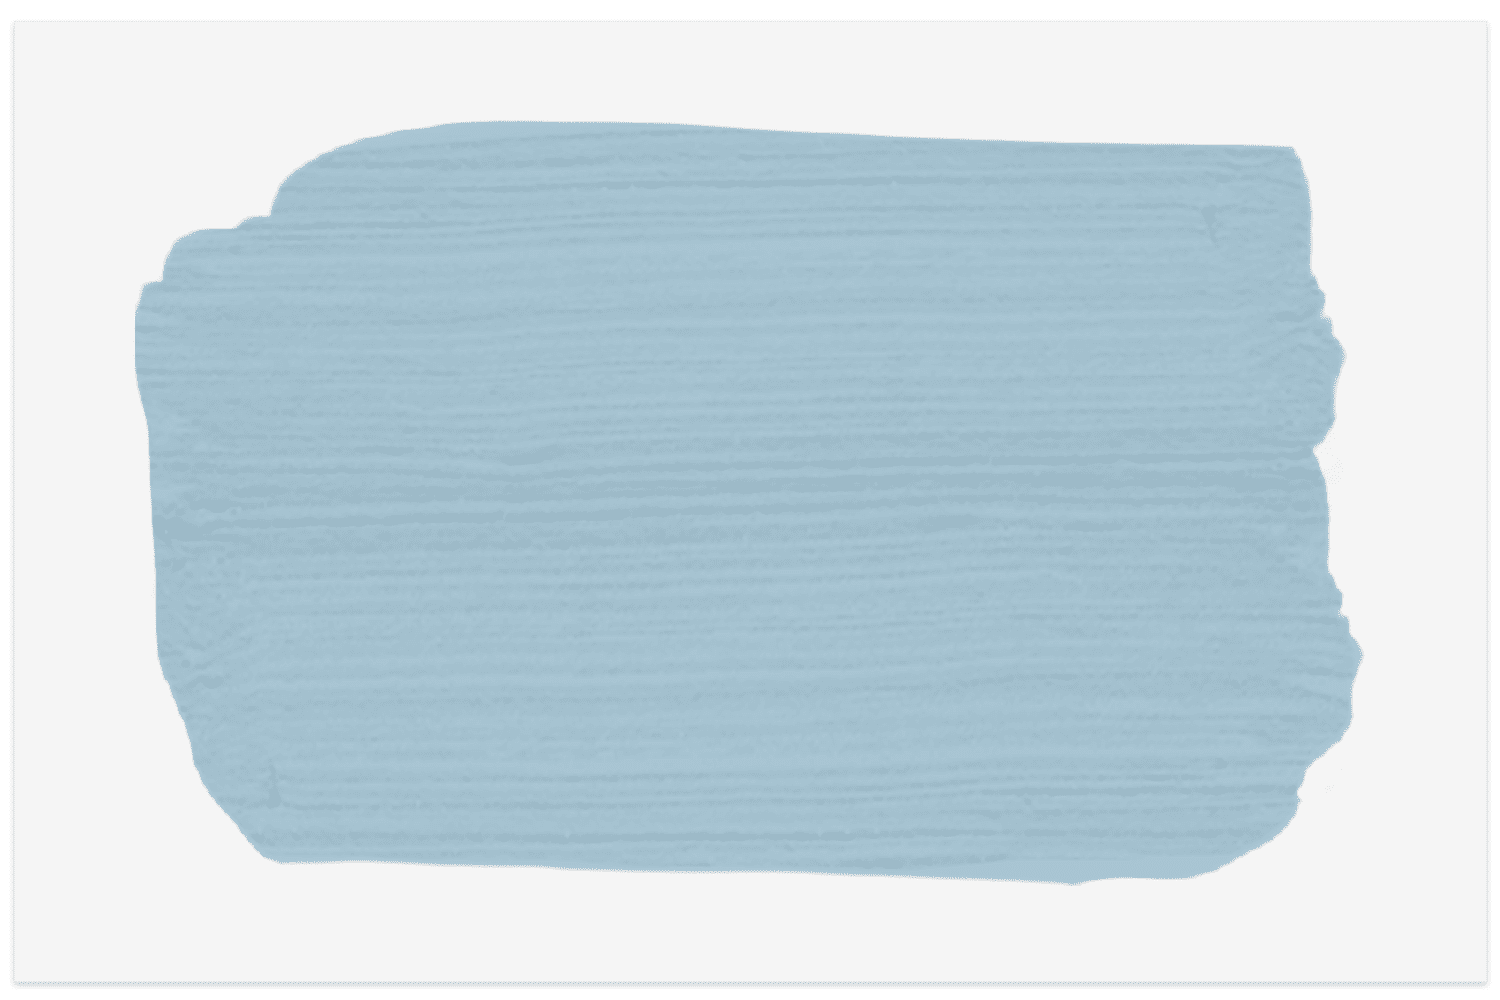 Swatch of Bluebird from Paint & Paper Library